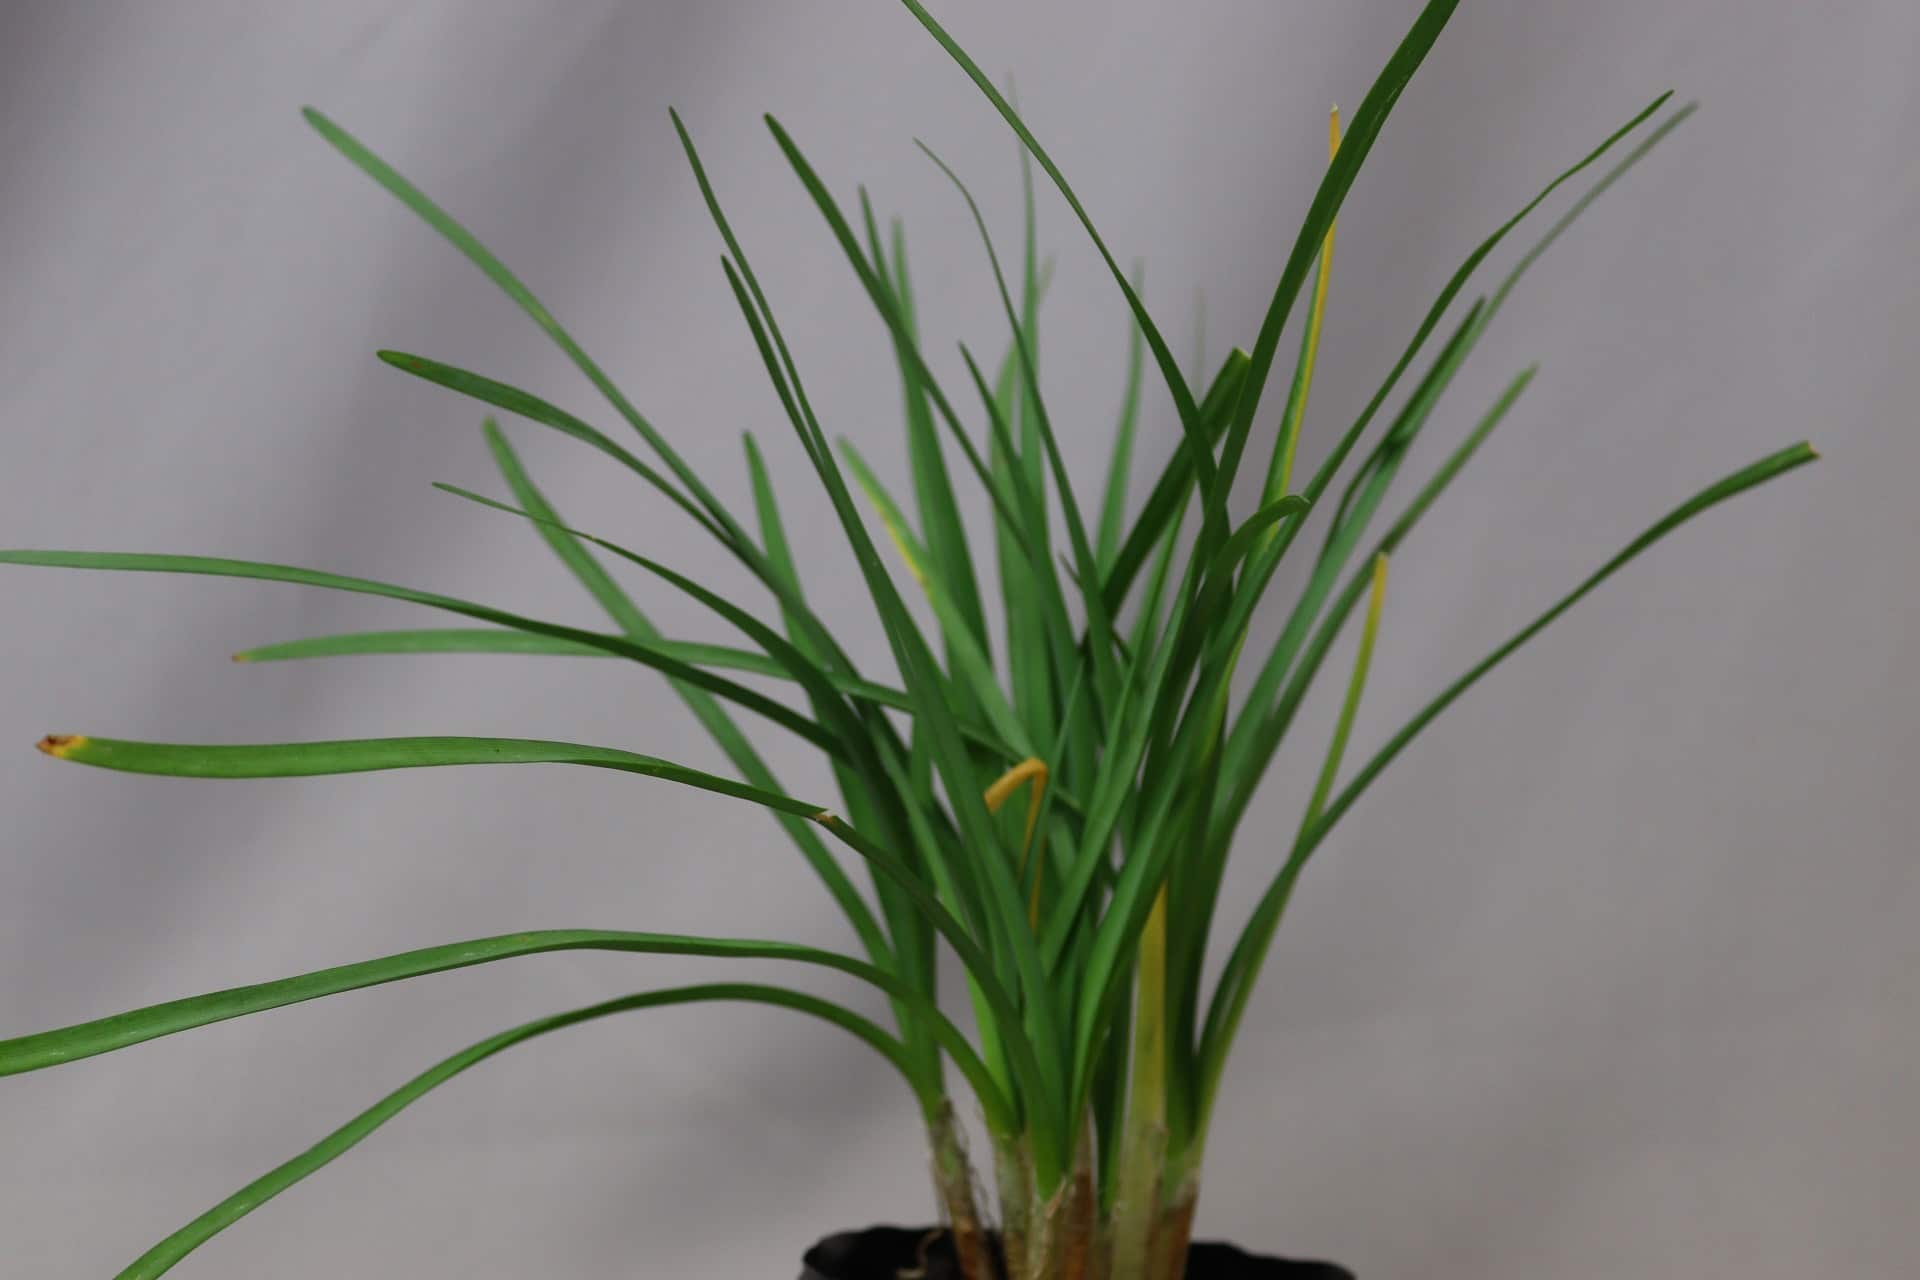 A lush green garlic plant with long leaves in a black pot against a grey background.